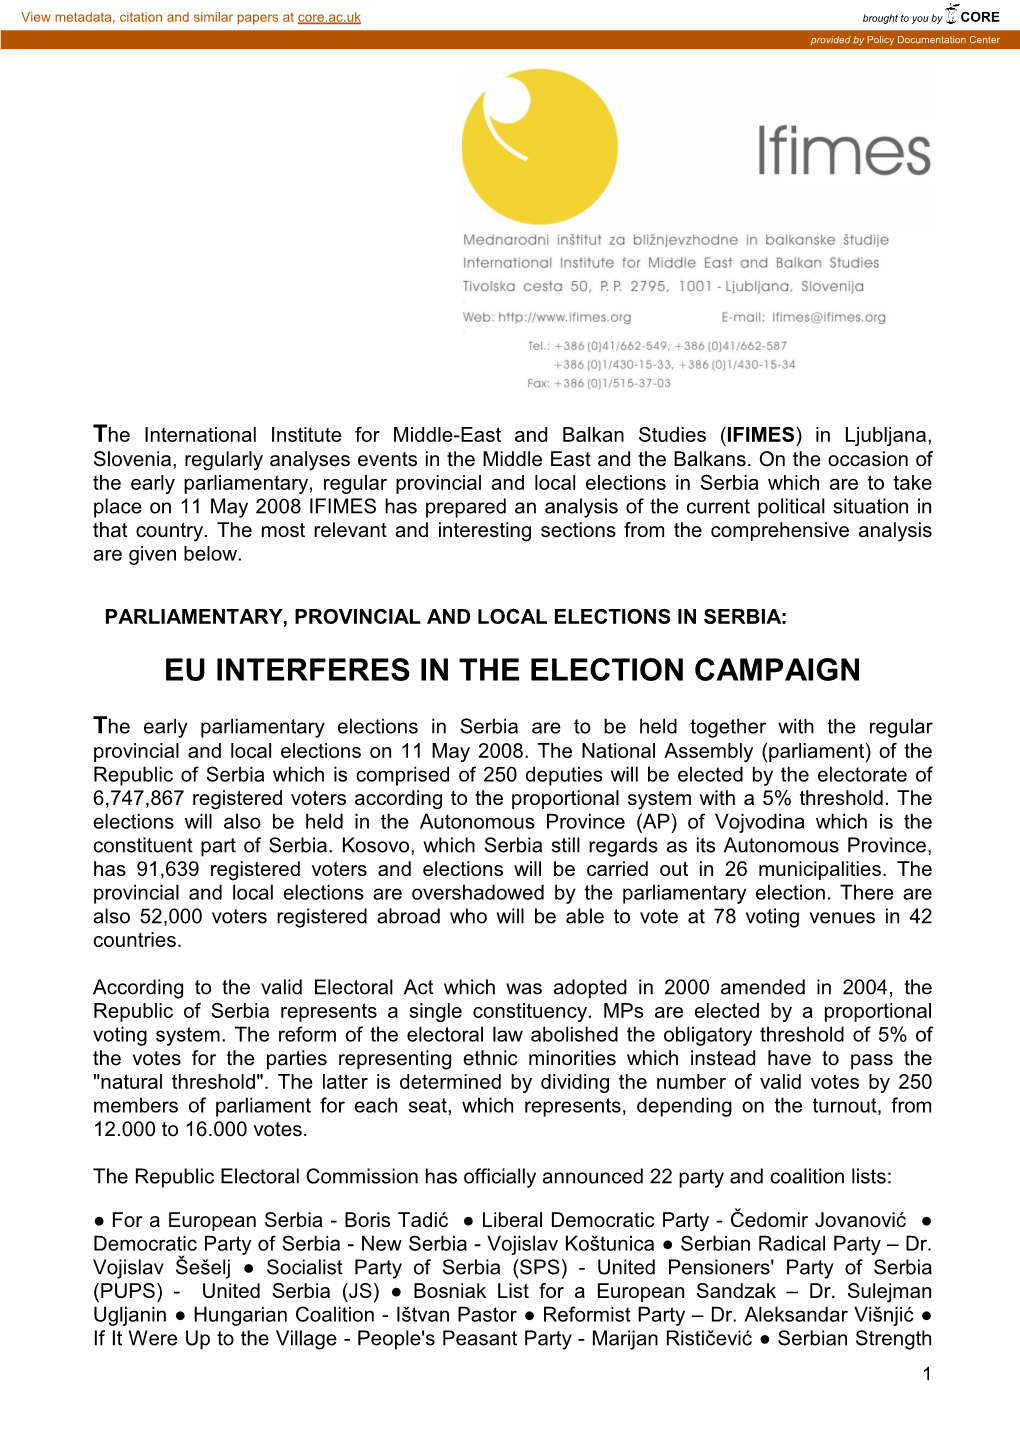 Eu Interferes in the Election Campaign